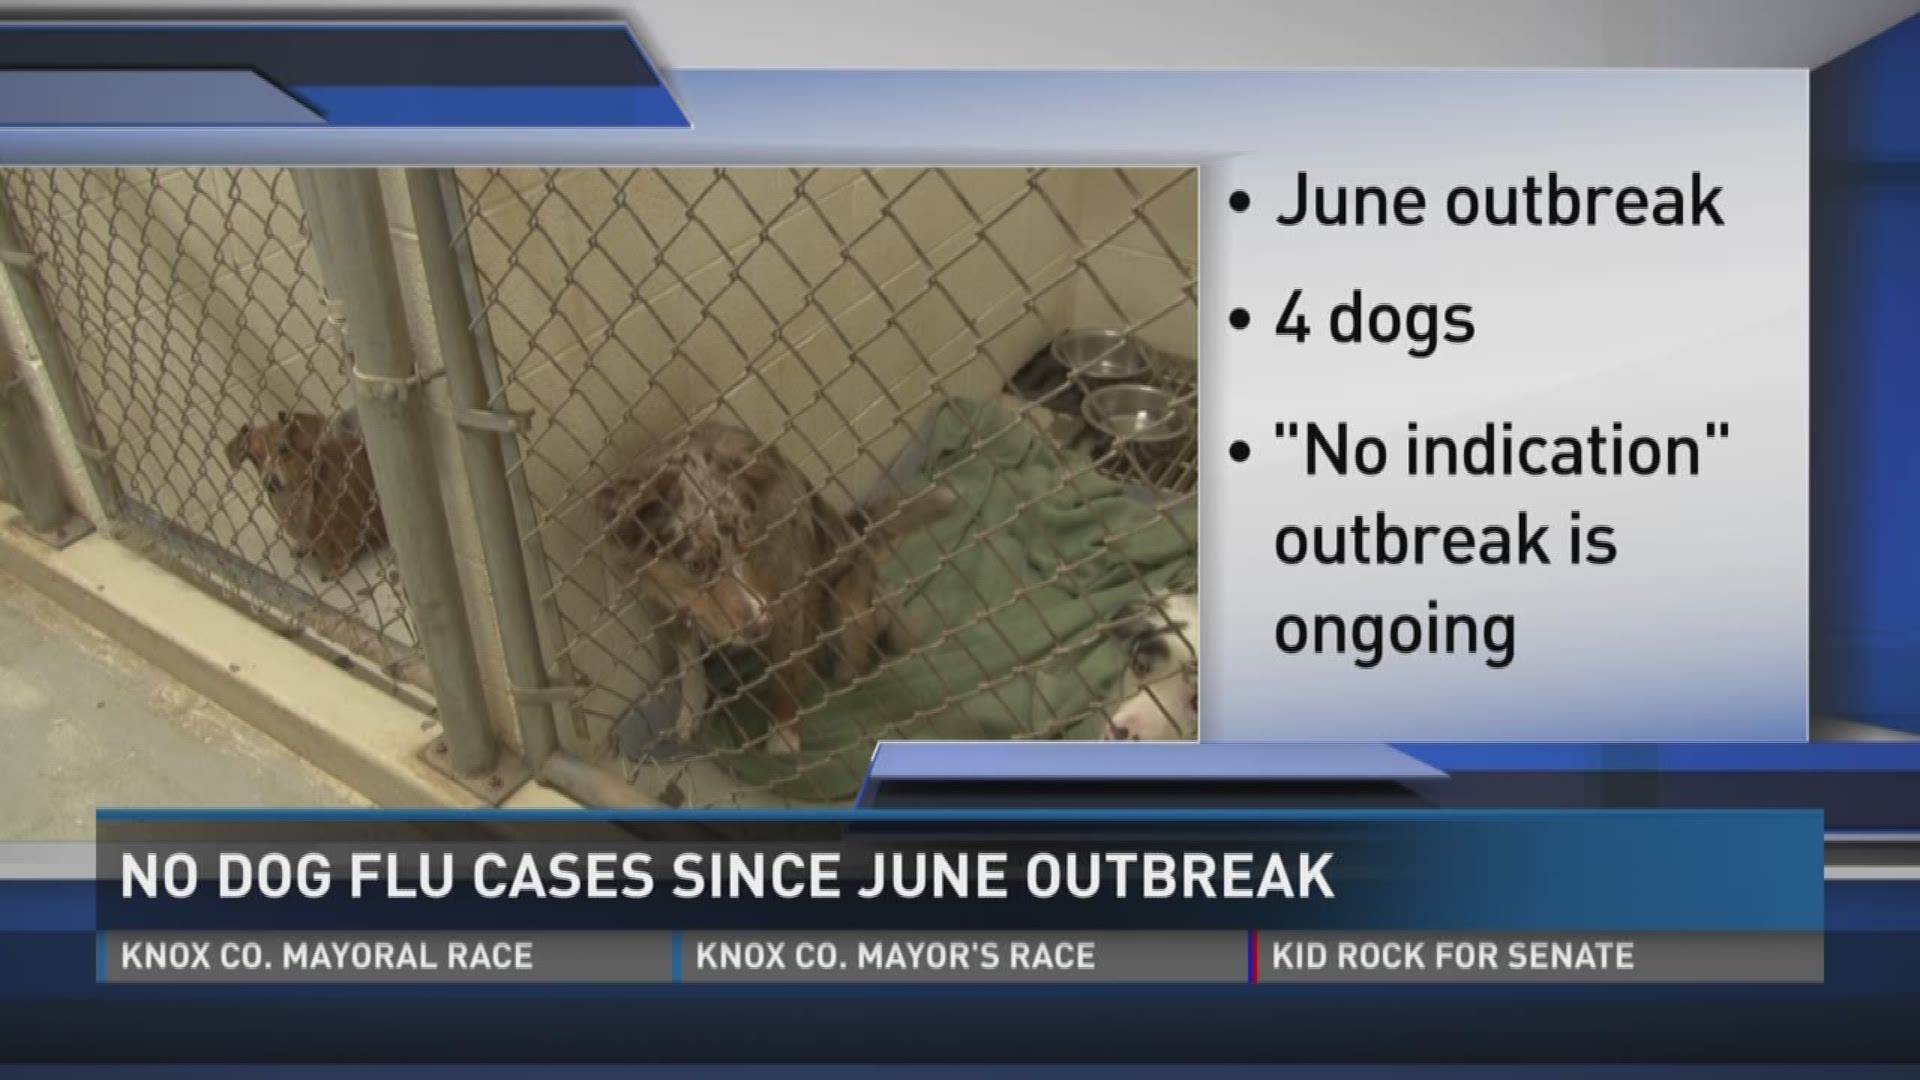 July 12, 2017: There have been no new cases of the dog flu in the Knoxville area since an outbreak in June. 